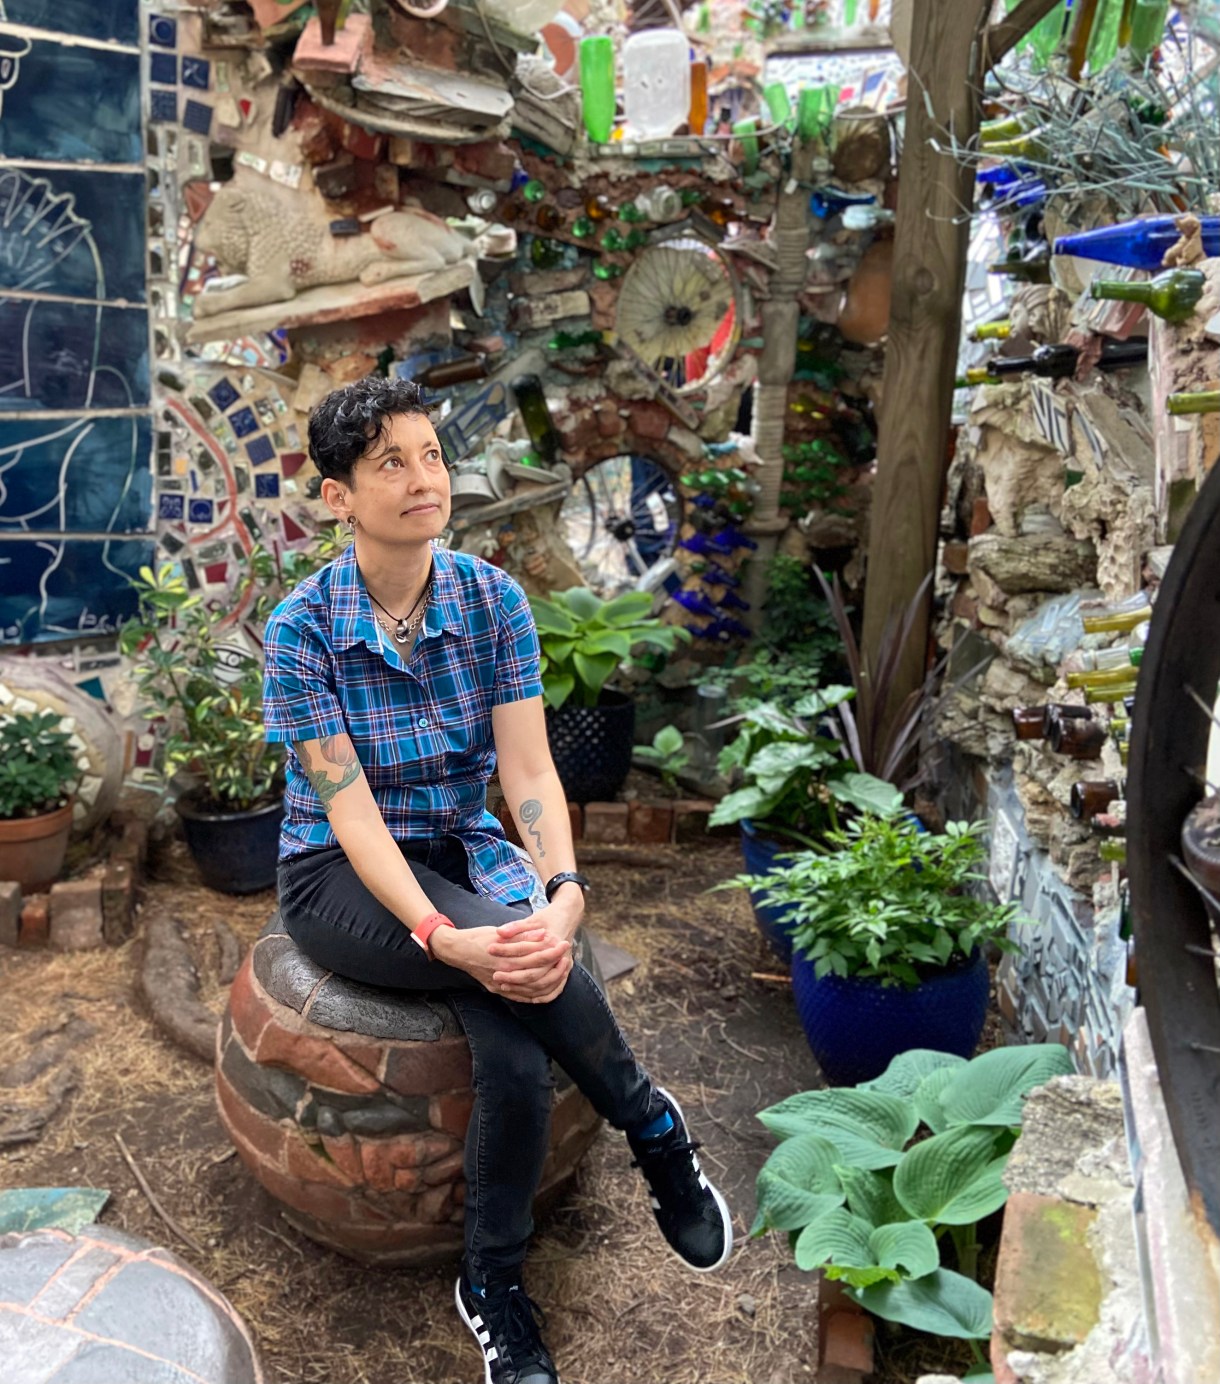 Tracy an Asian woman sits,  with short hair, sits with legs crossed on a stool or bench situation in front of a bunch of mosaics